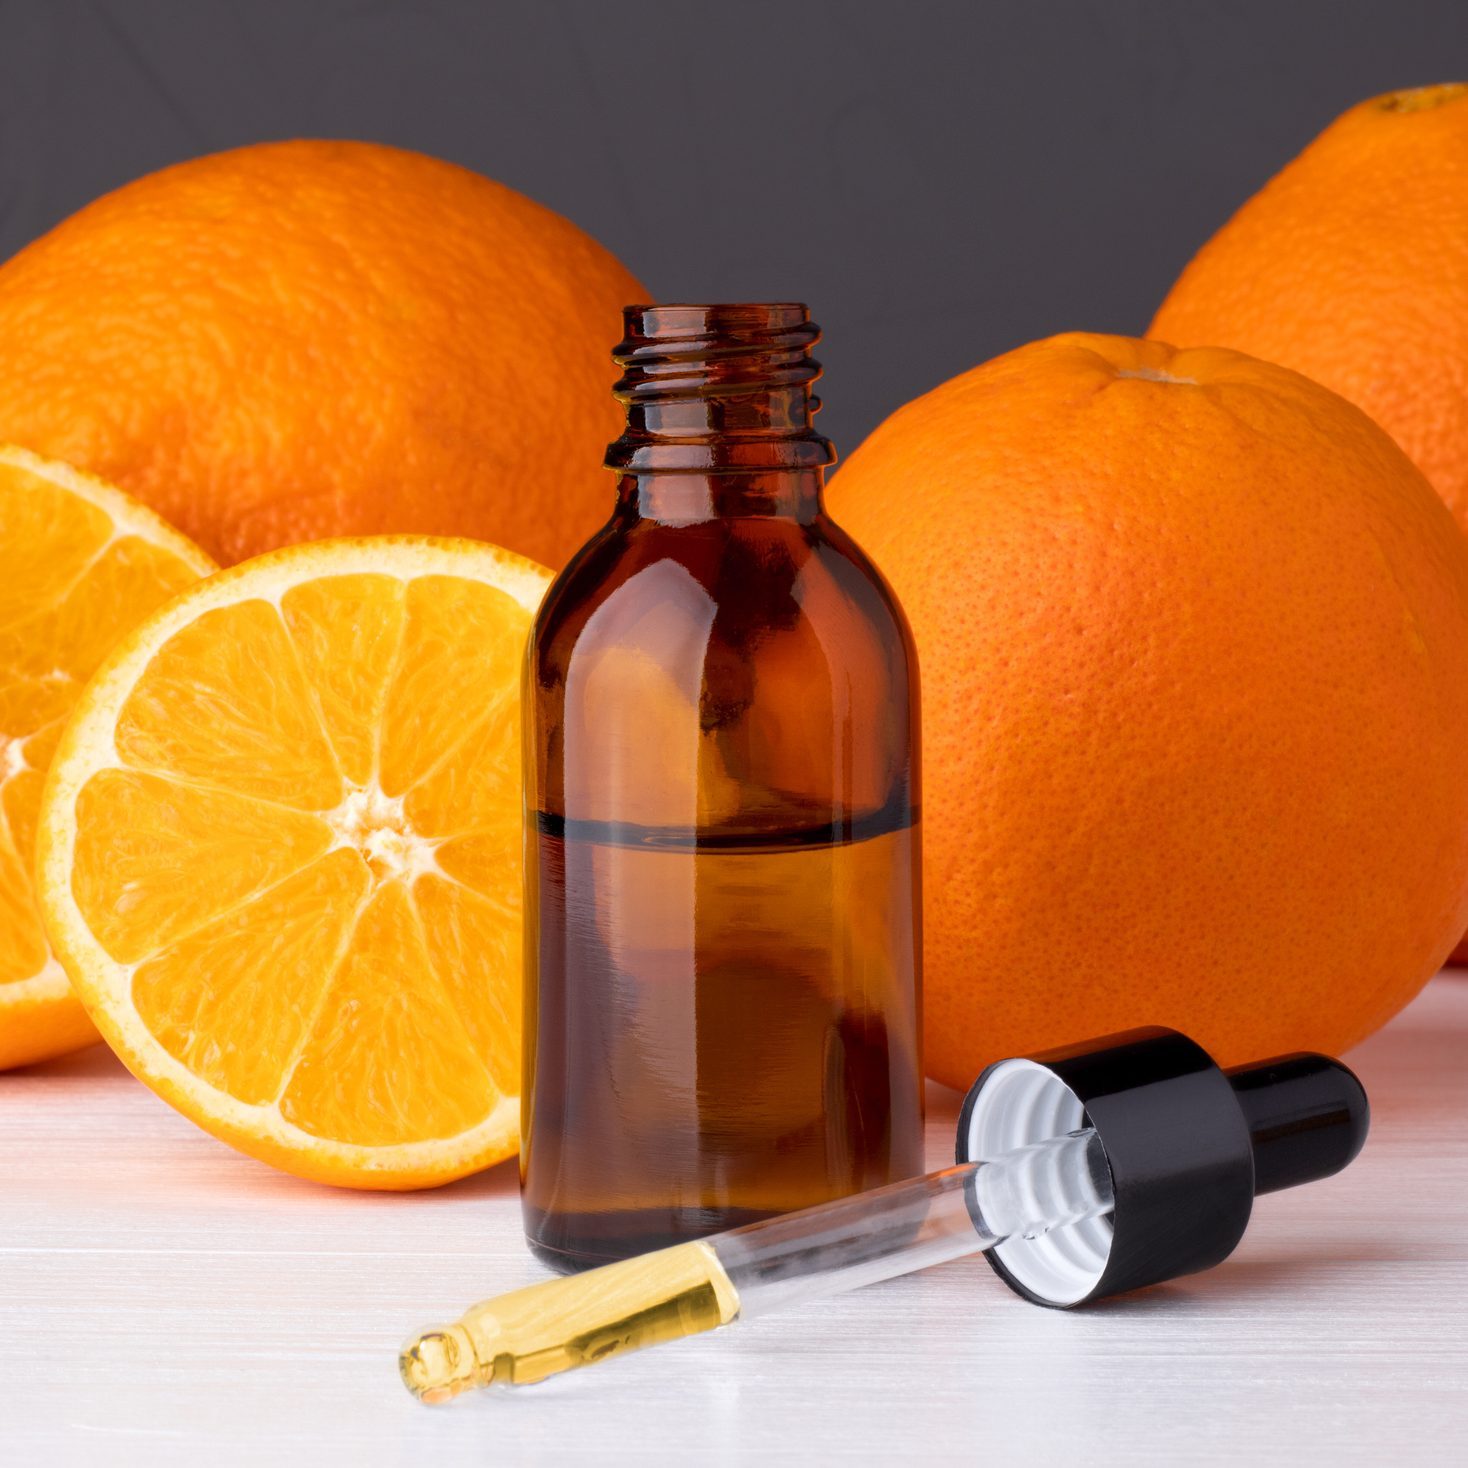 Bottle with essential oils, dropper with oil. Fresh oranges.